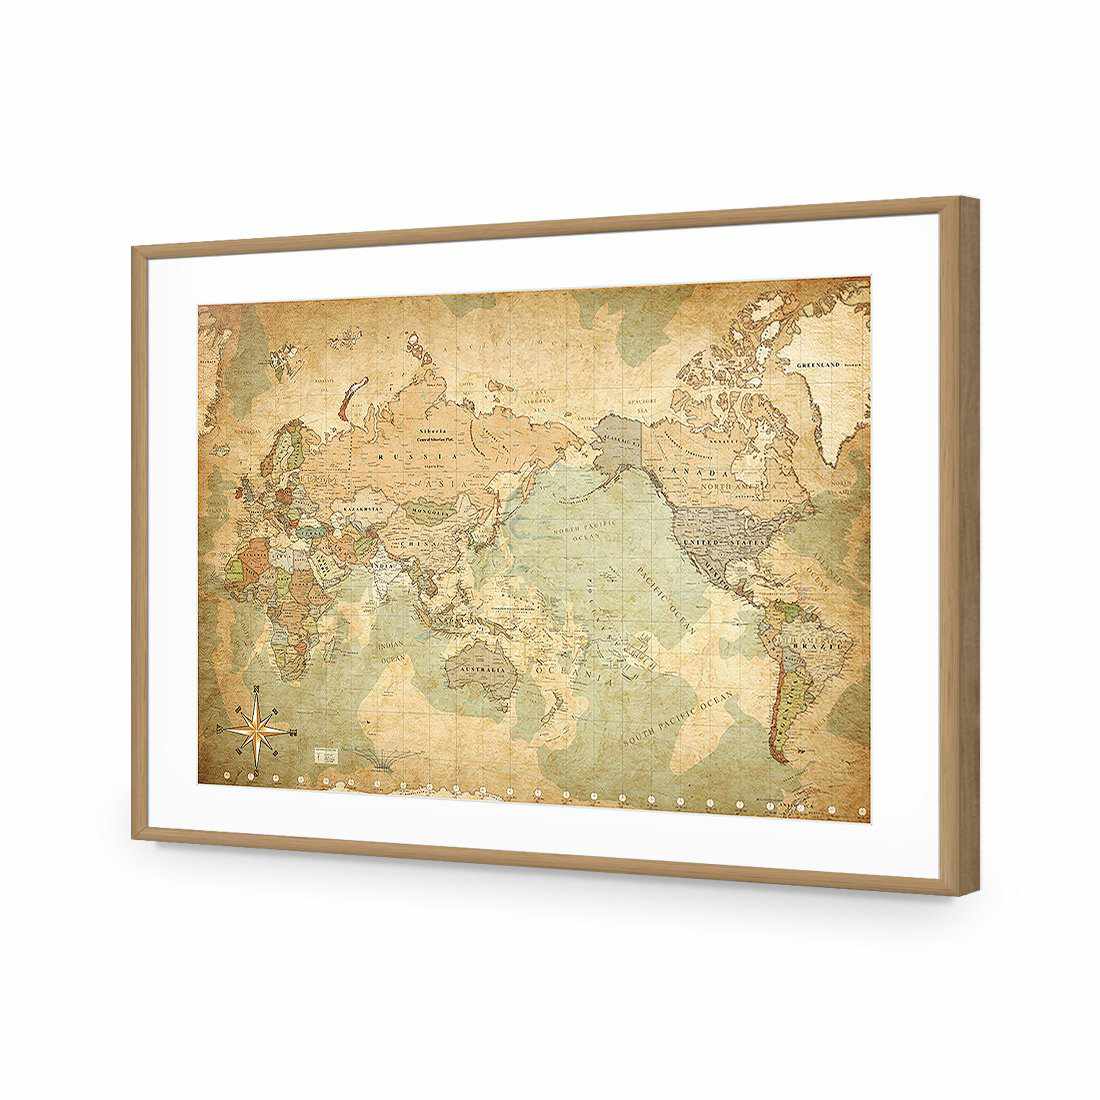 Antique World Map-Acrylic-Wall Art Design-With Border-Acrylic - Oak Frame-45x30cm-Wall Art Designs